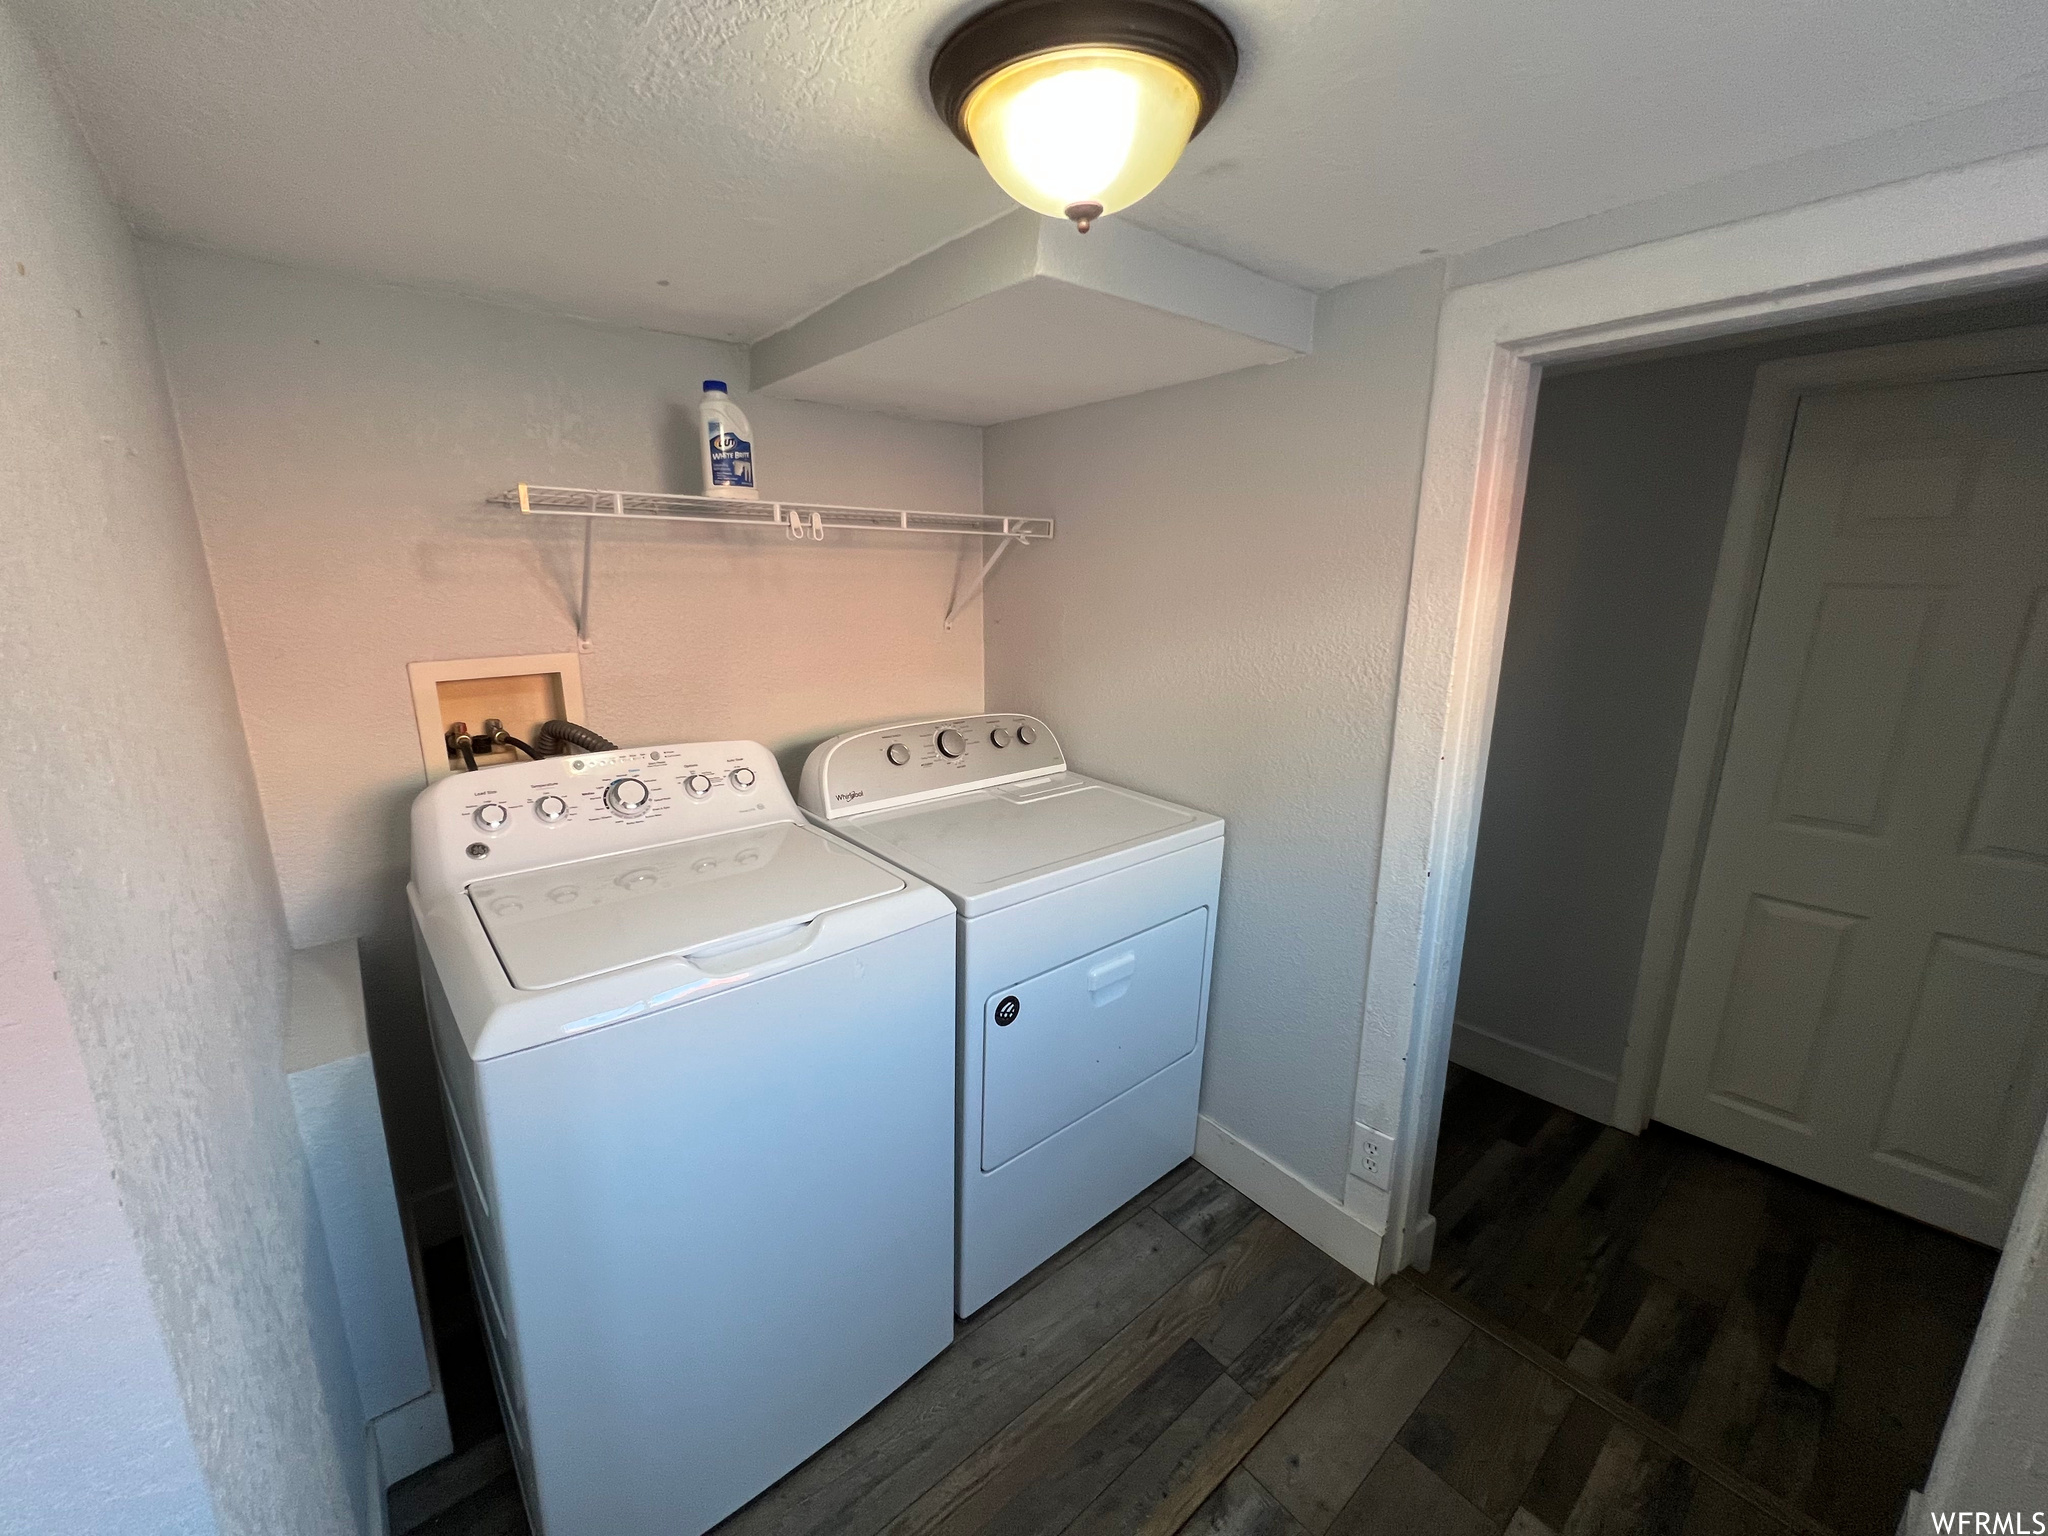 Washroom with dark laminate floors and washer and dryer